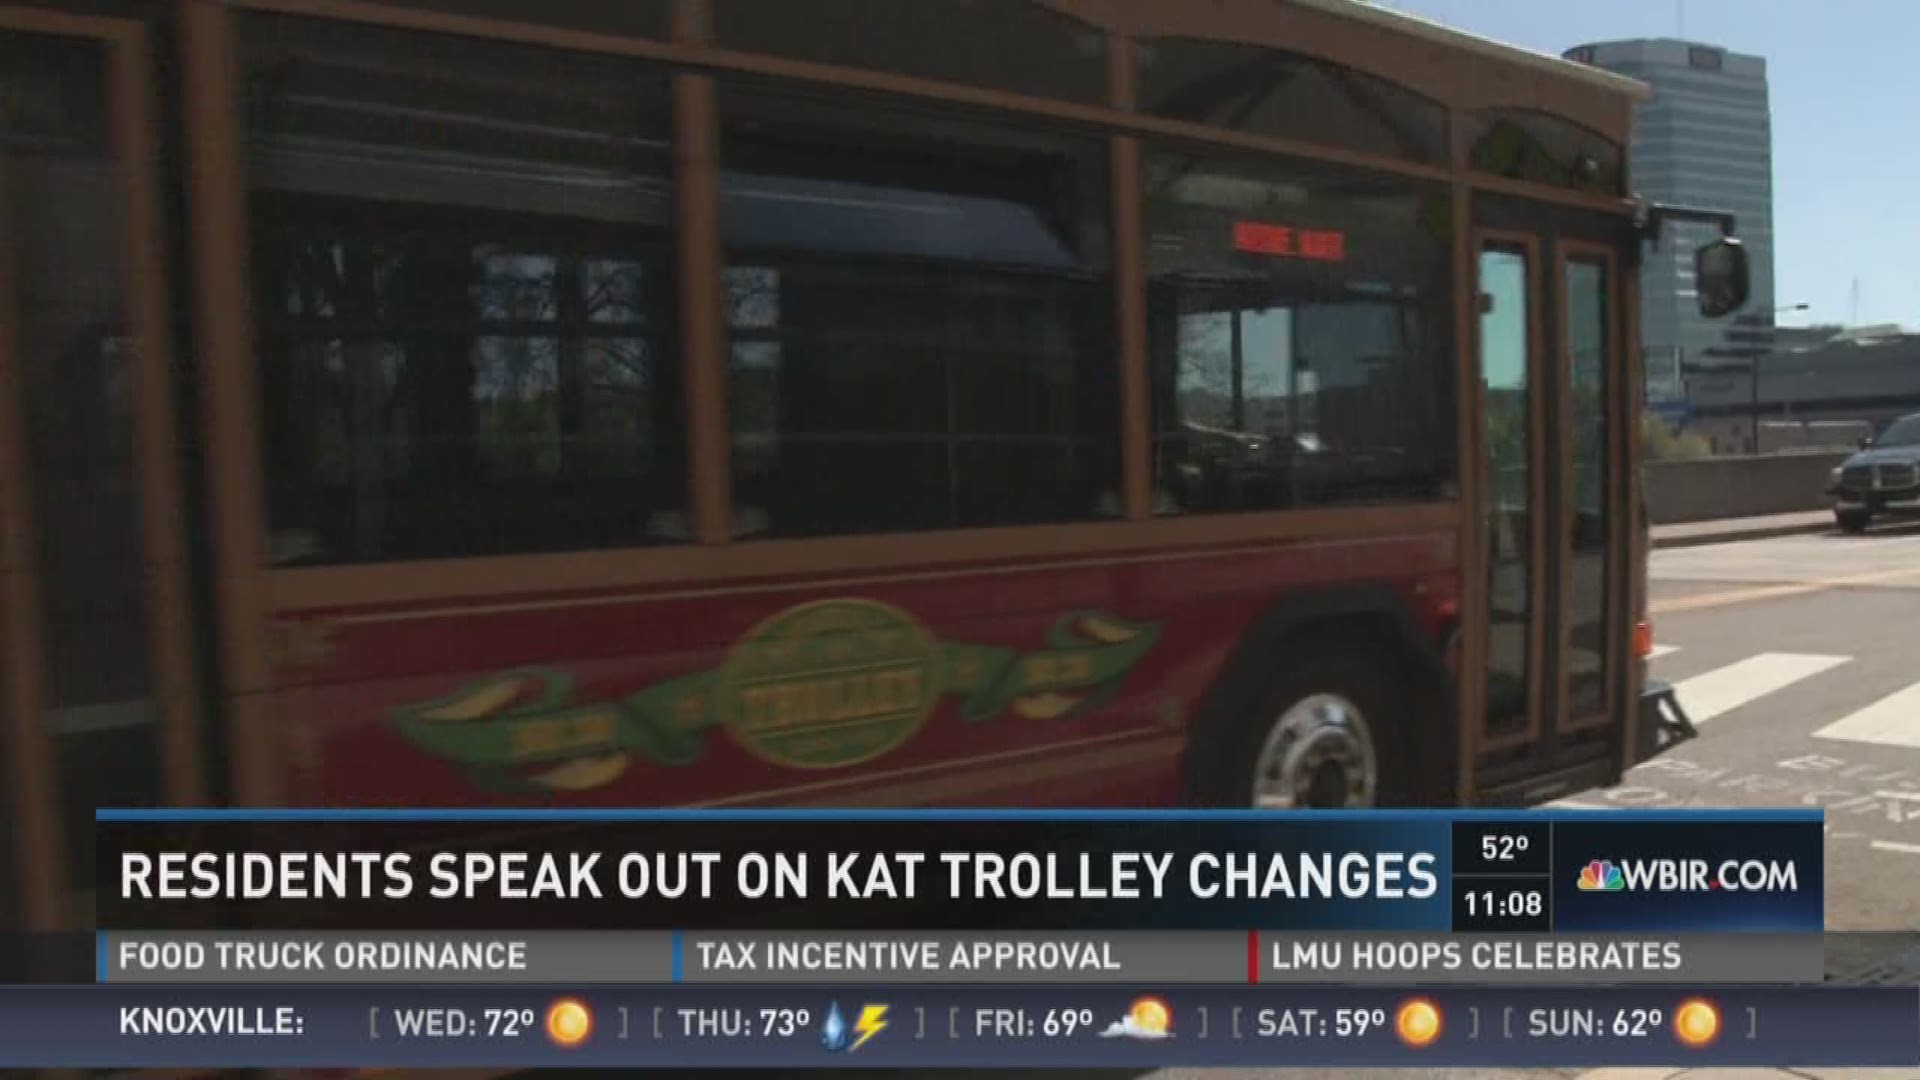 10News anchor Aaron Wright has more on the controversial changes to the KAT bus schedule for one building.